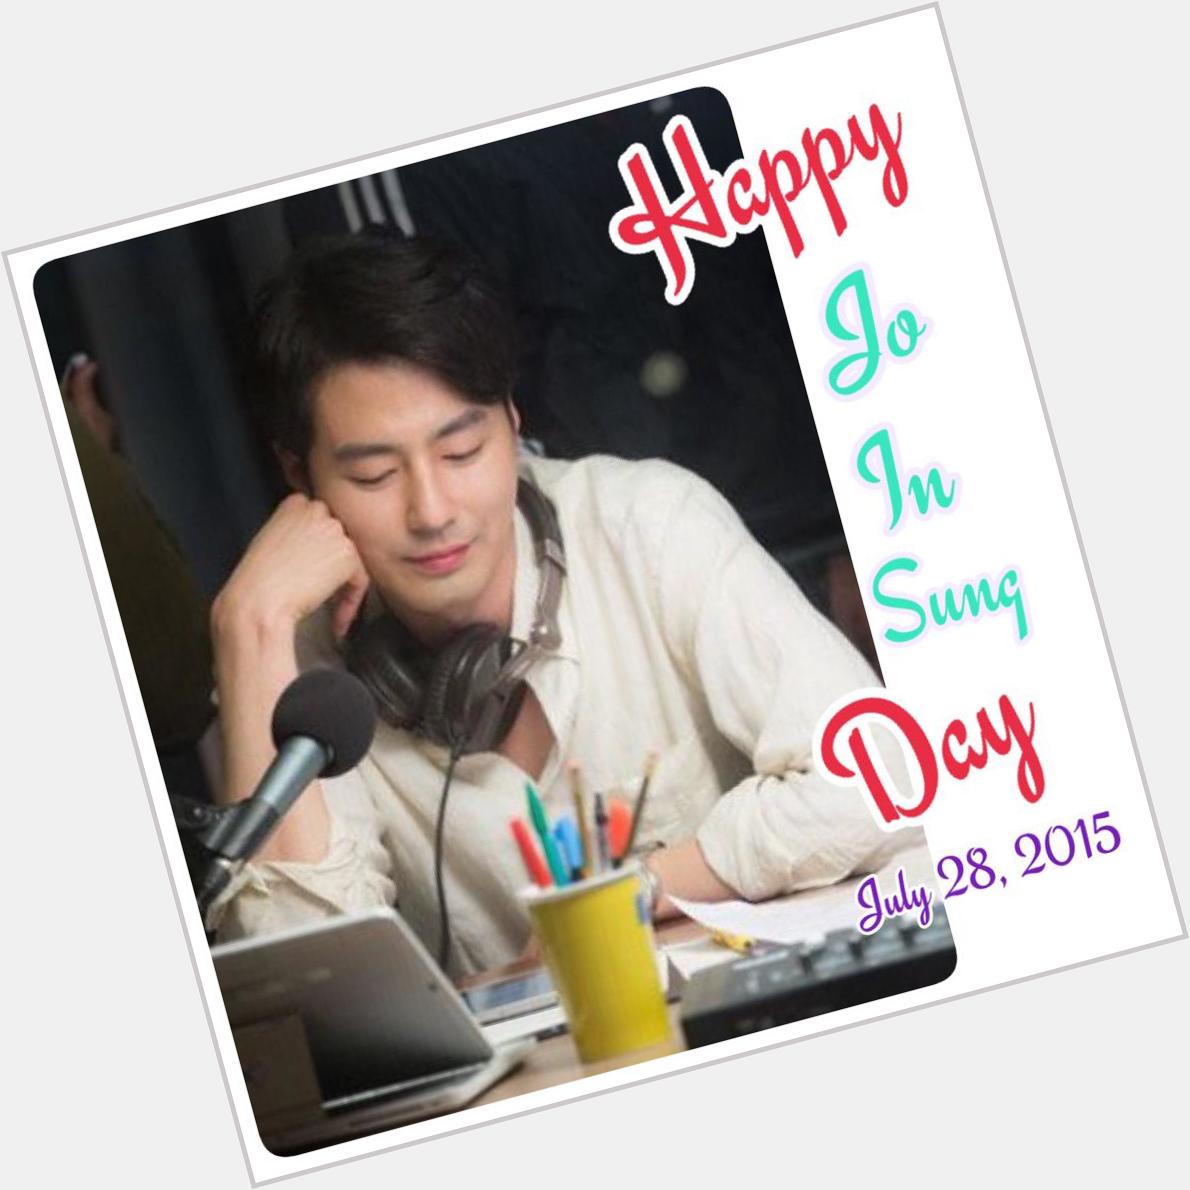 Happy Birthday to Jo In Sung Oppa Wish all the best for you   